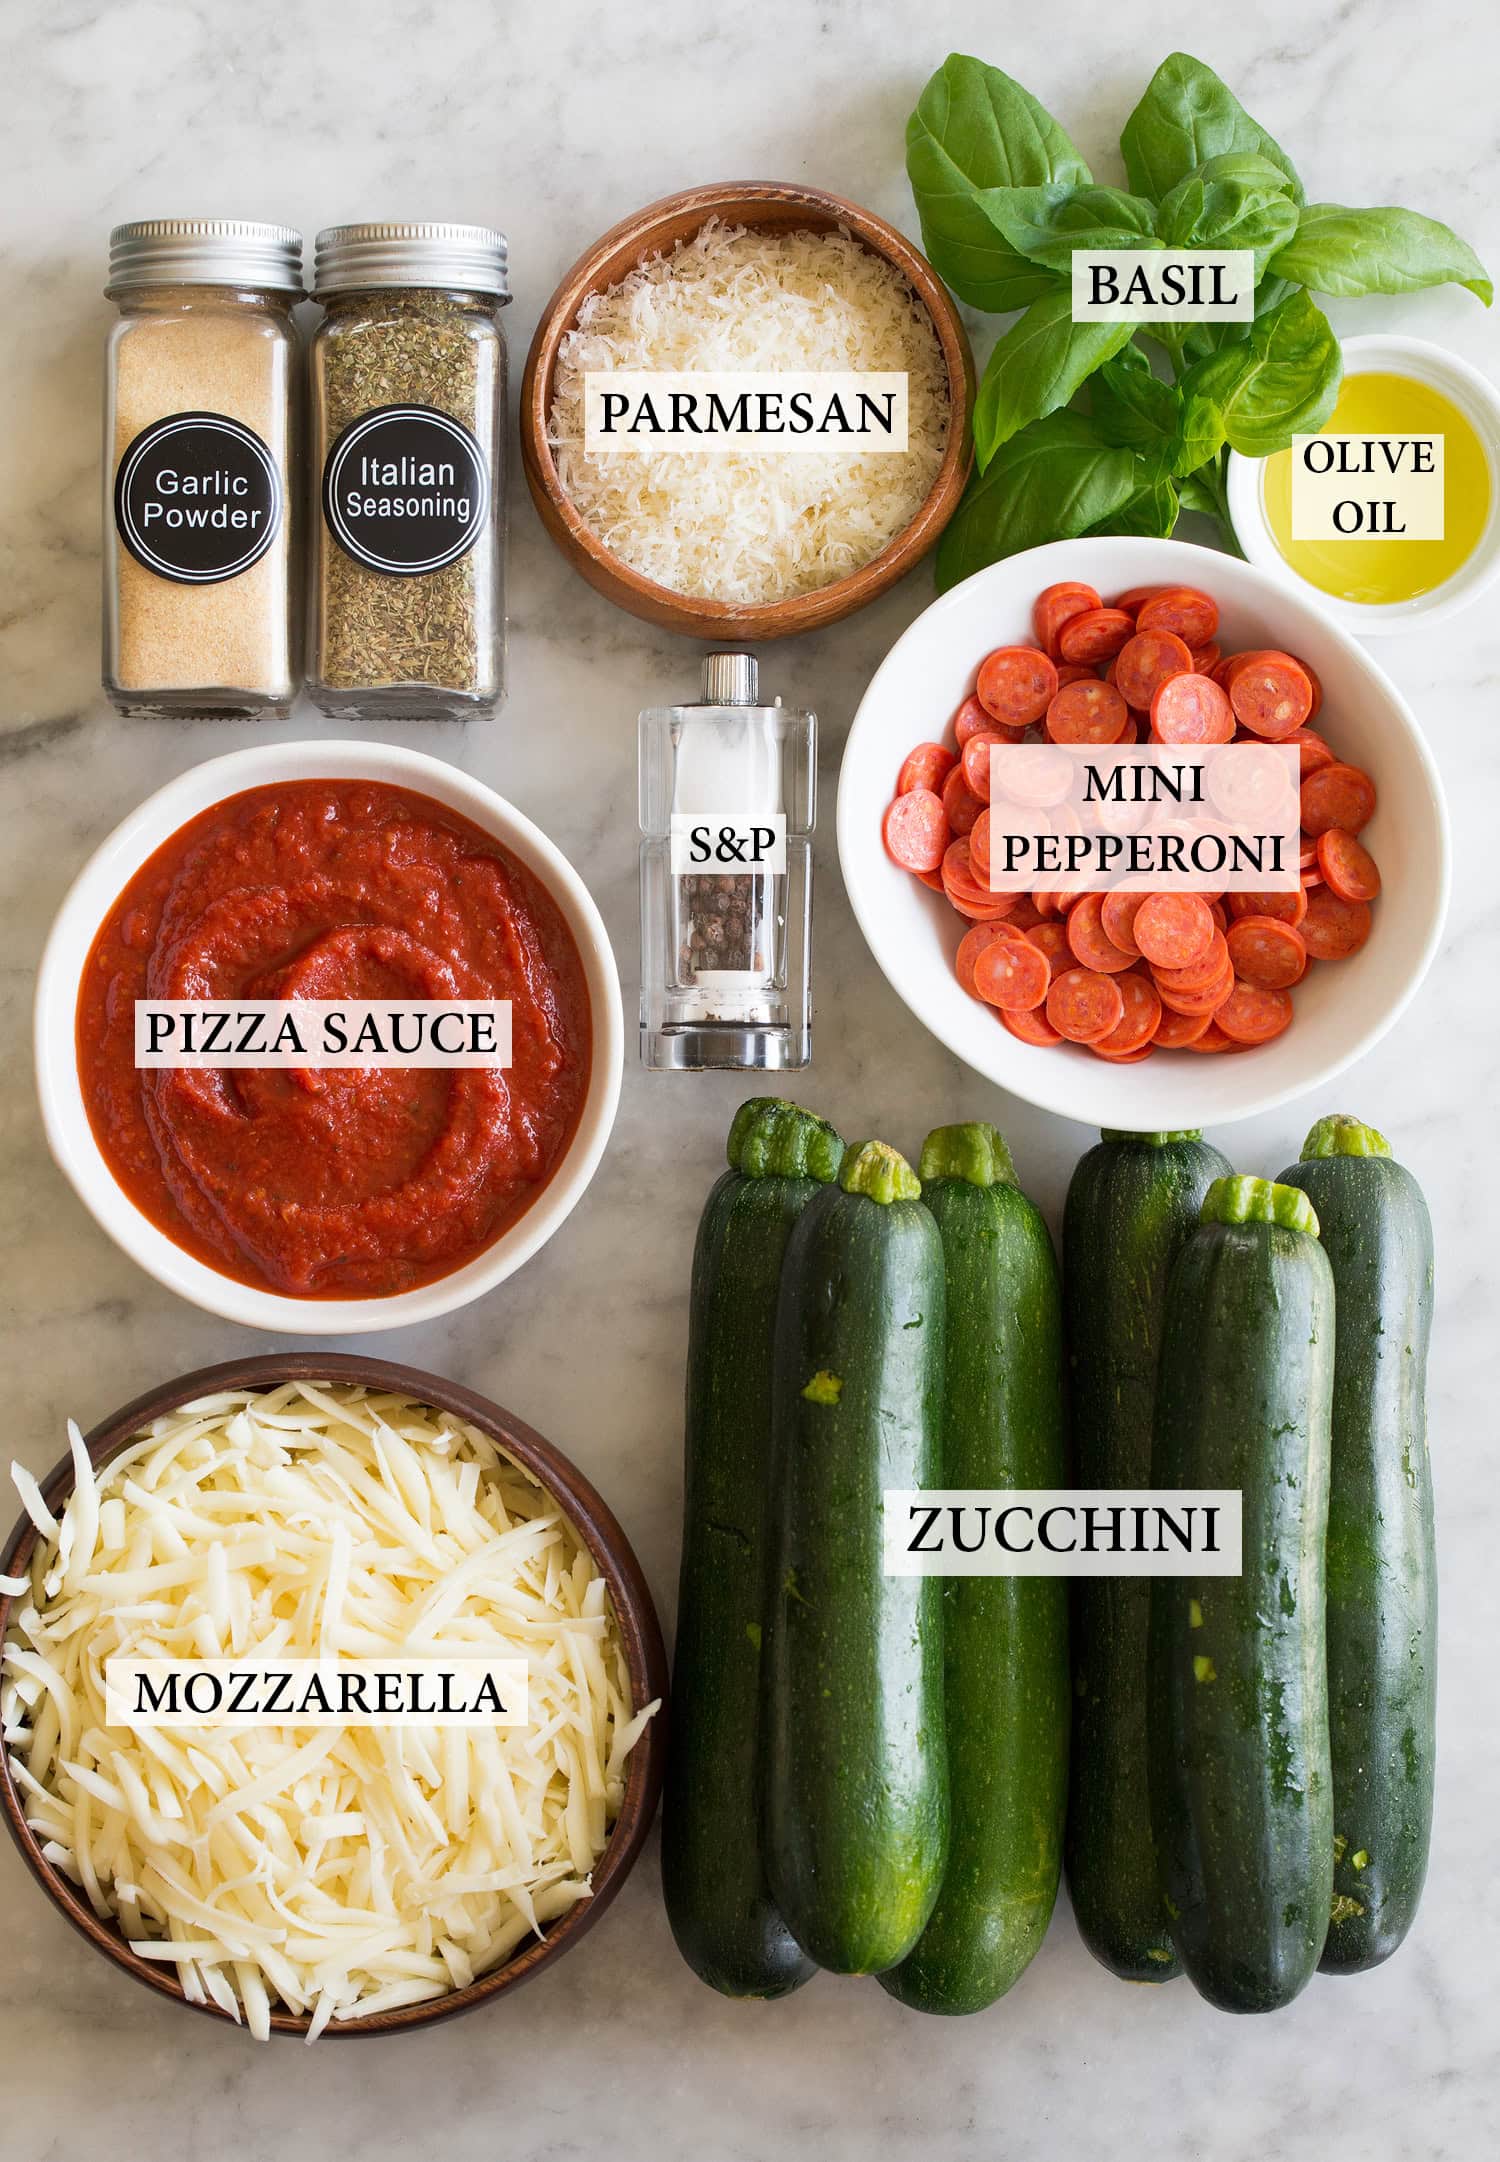 Ingredients used for zucchini pizza.